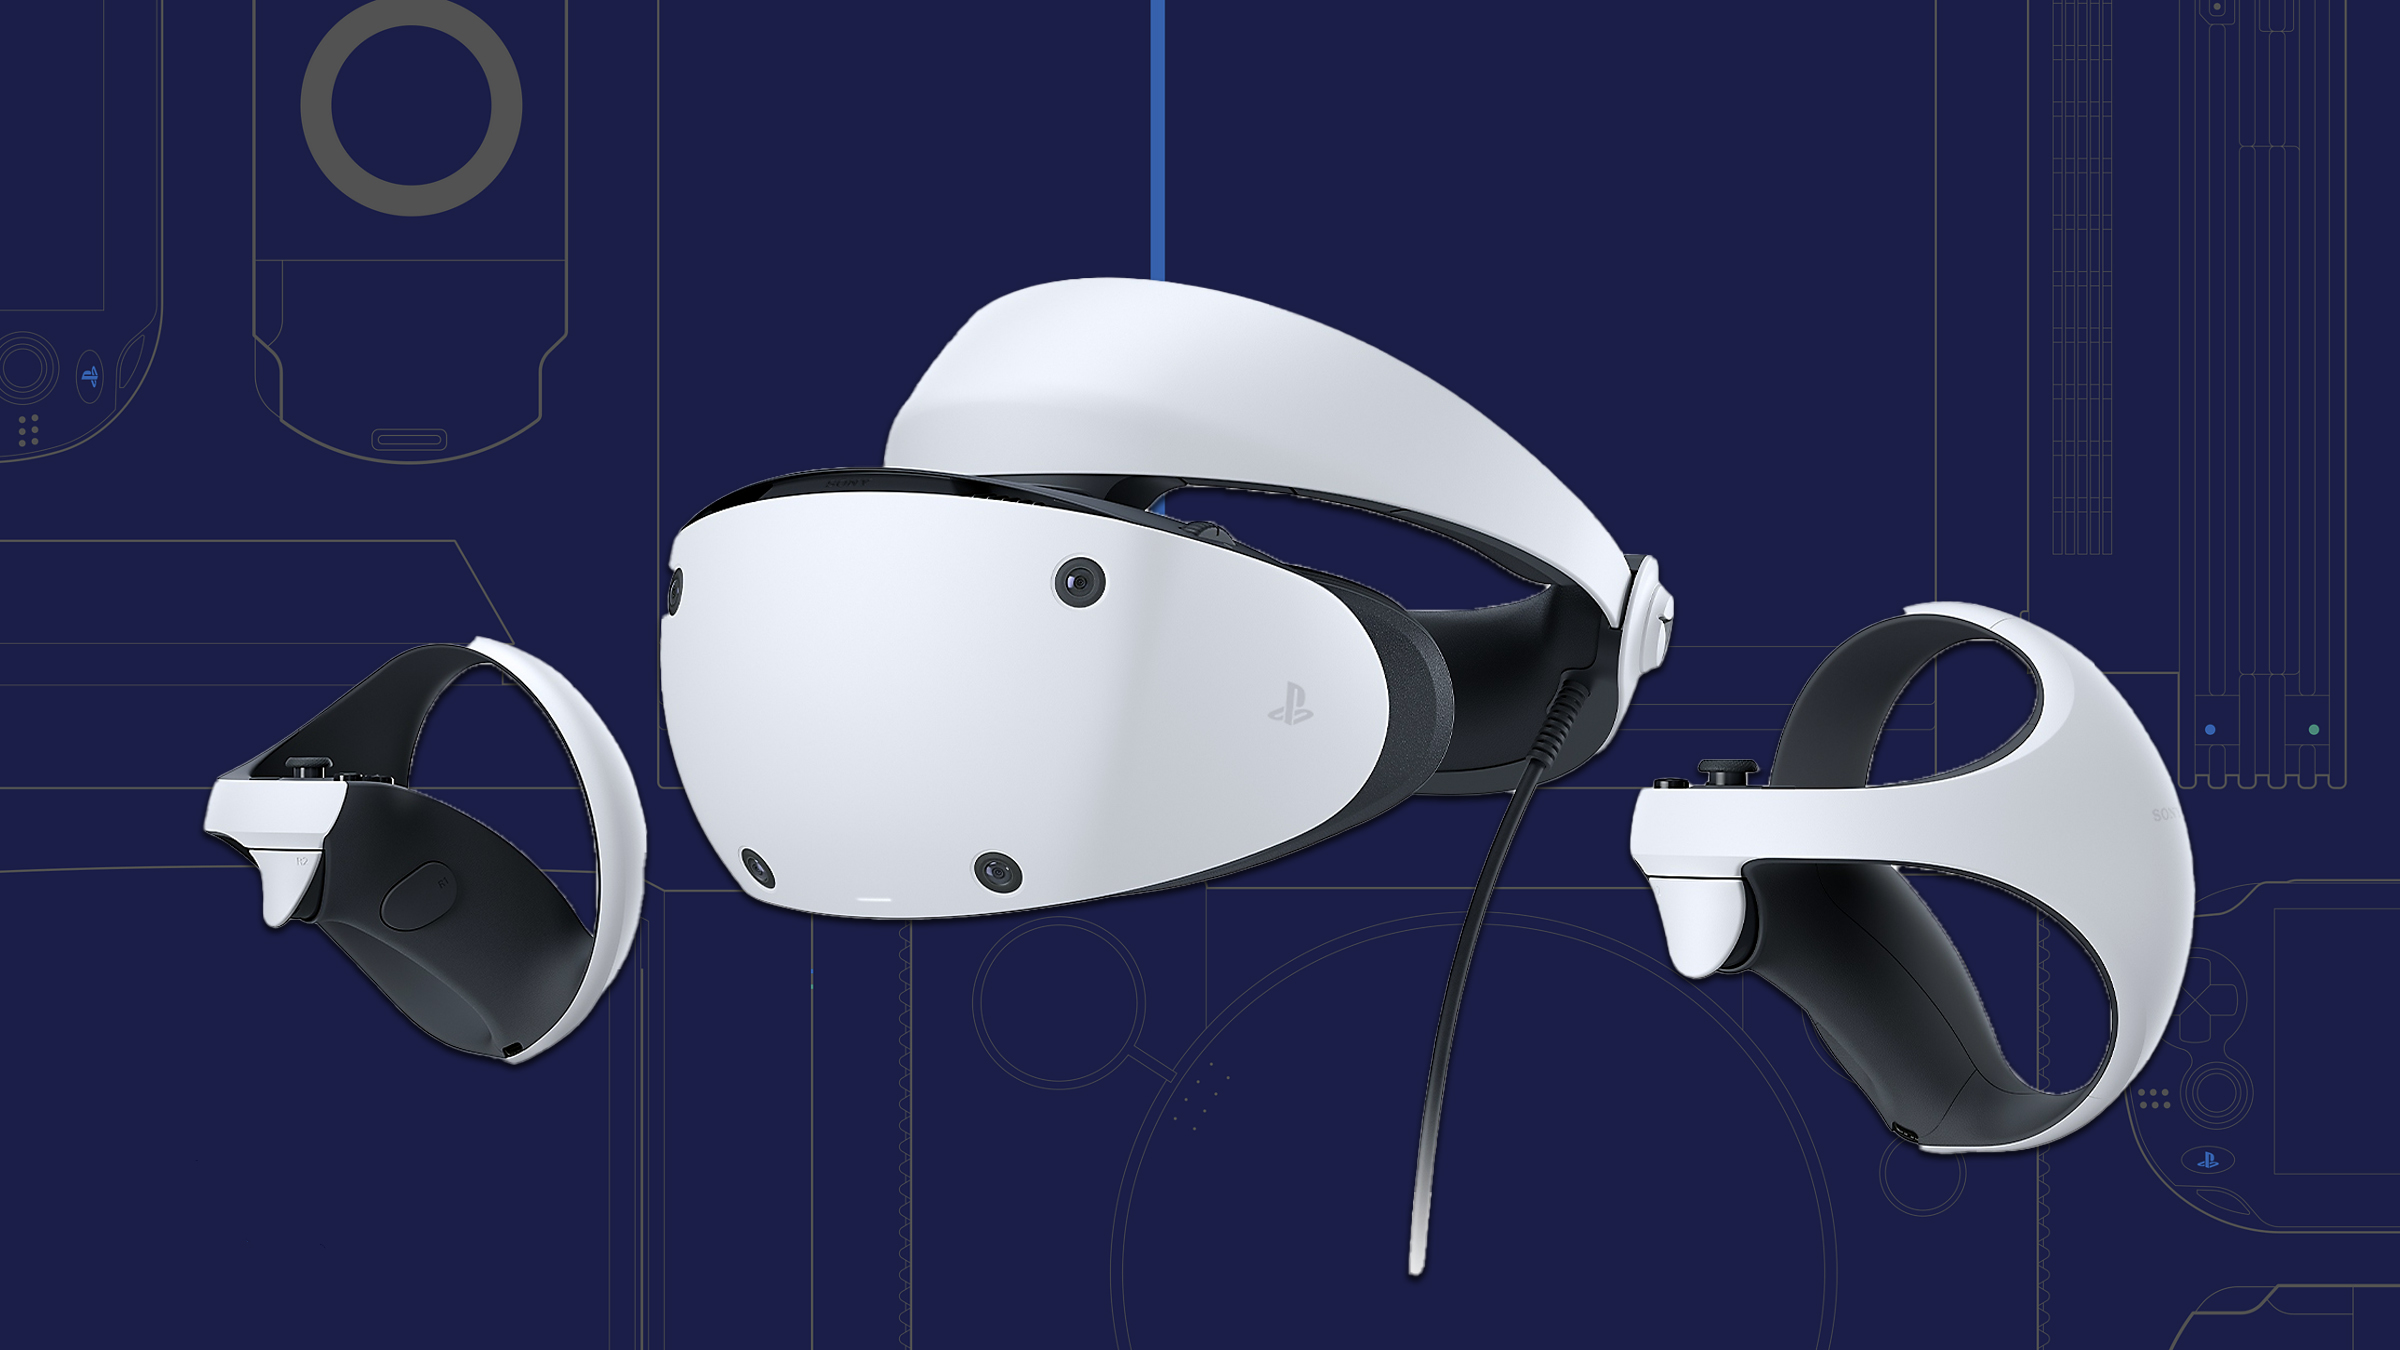 PSVR vs. PSVR 2: The difference between the Sony VR headsets